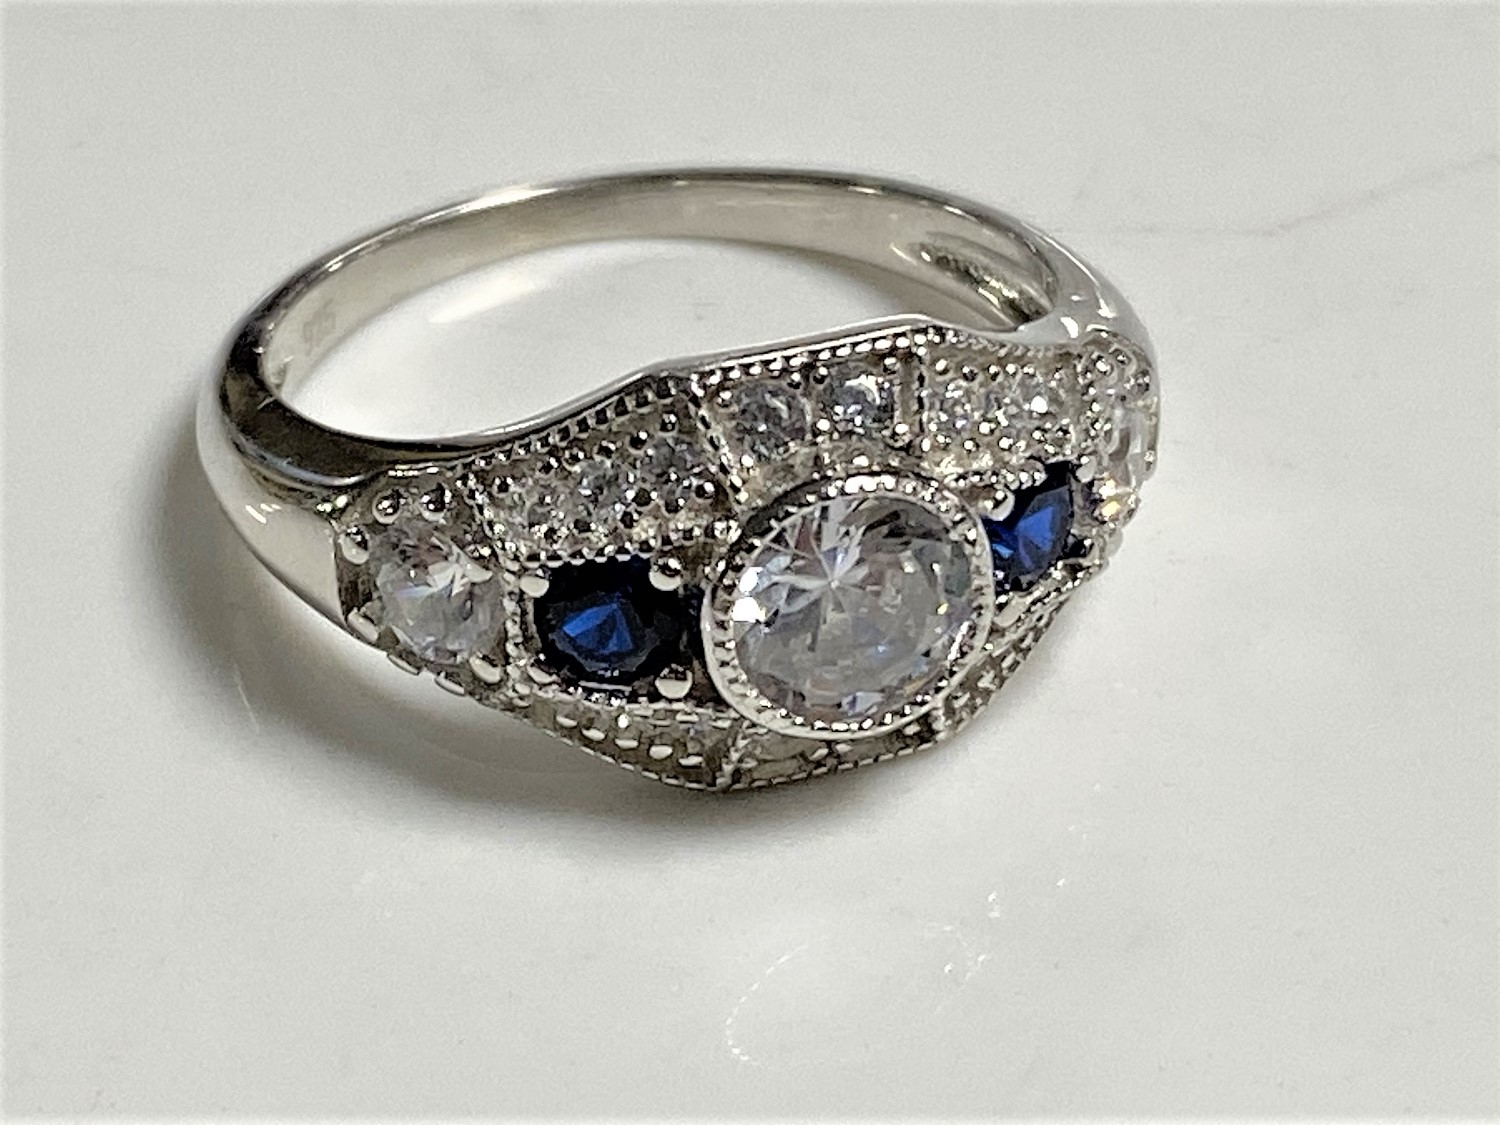 A silver Art Deco style ring